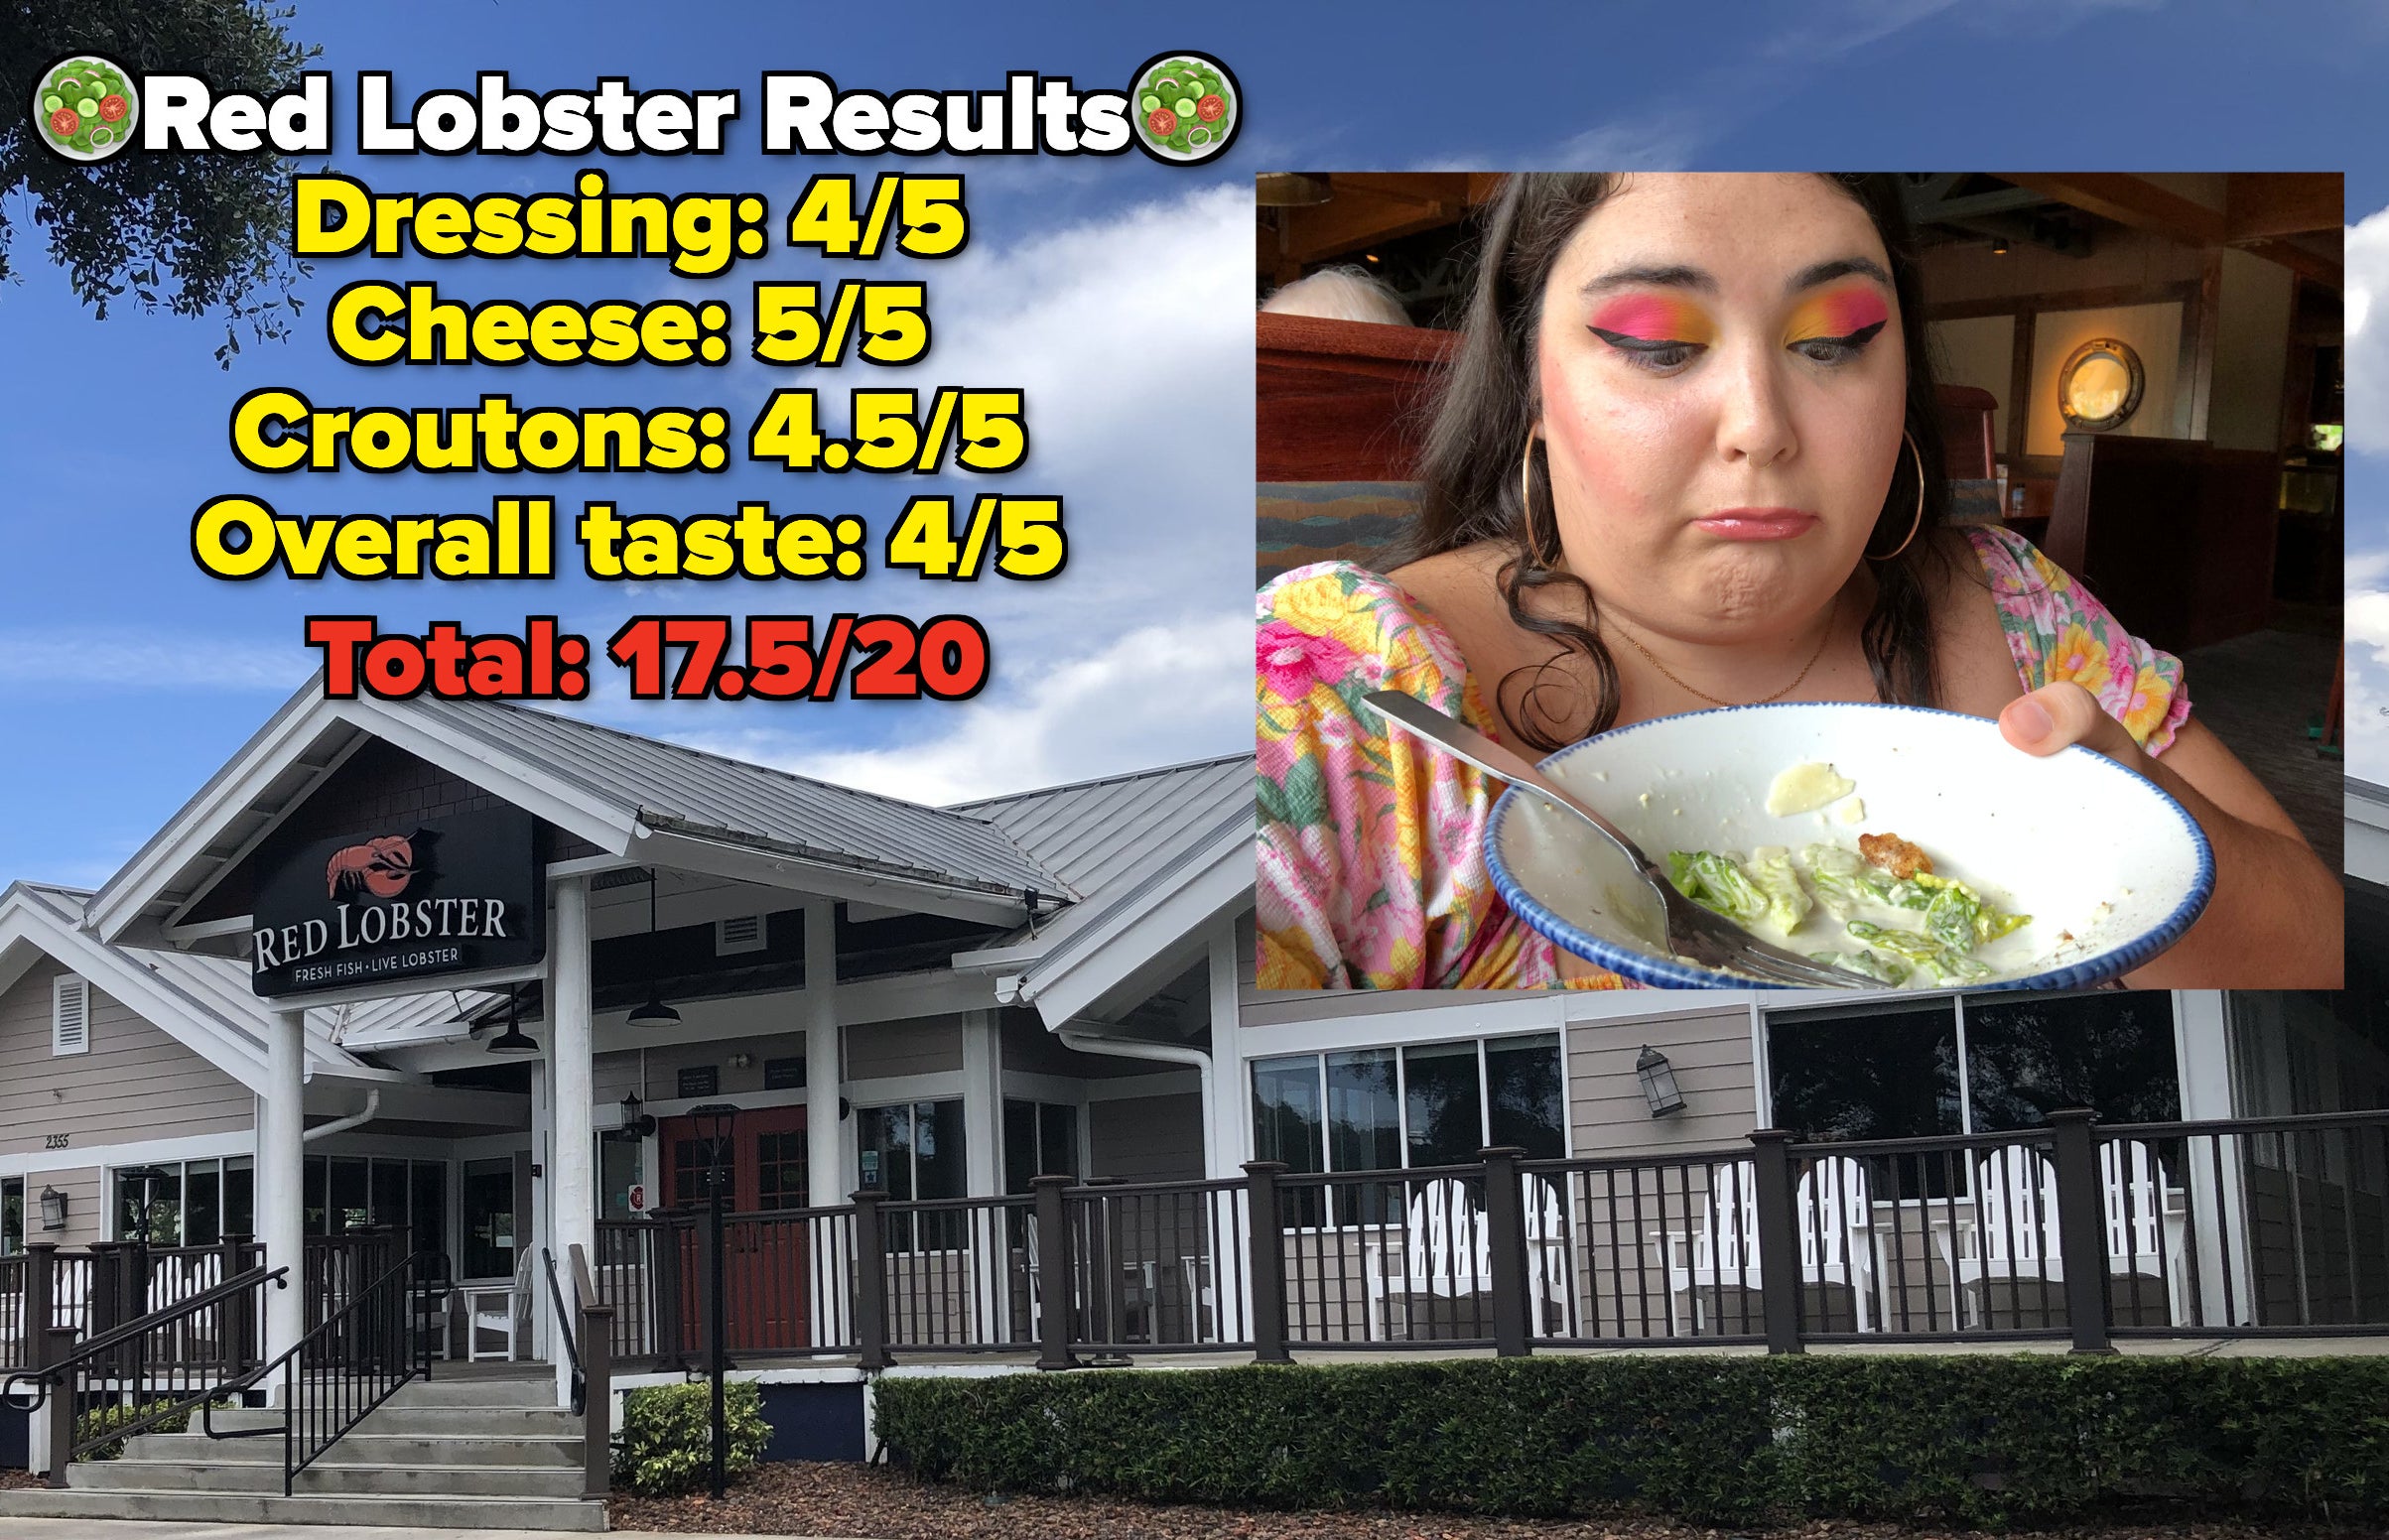 Photo of Red Lobster with text that says &quot;Red Lobster Results: dressing 4/5, cheese 5/5, croutons 4.5/5, overall taste 4/5, total 17.5/20&quot;